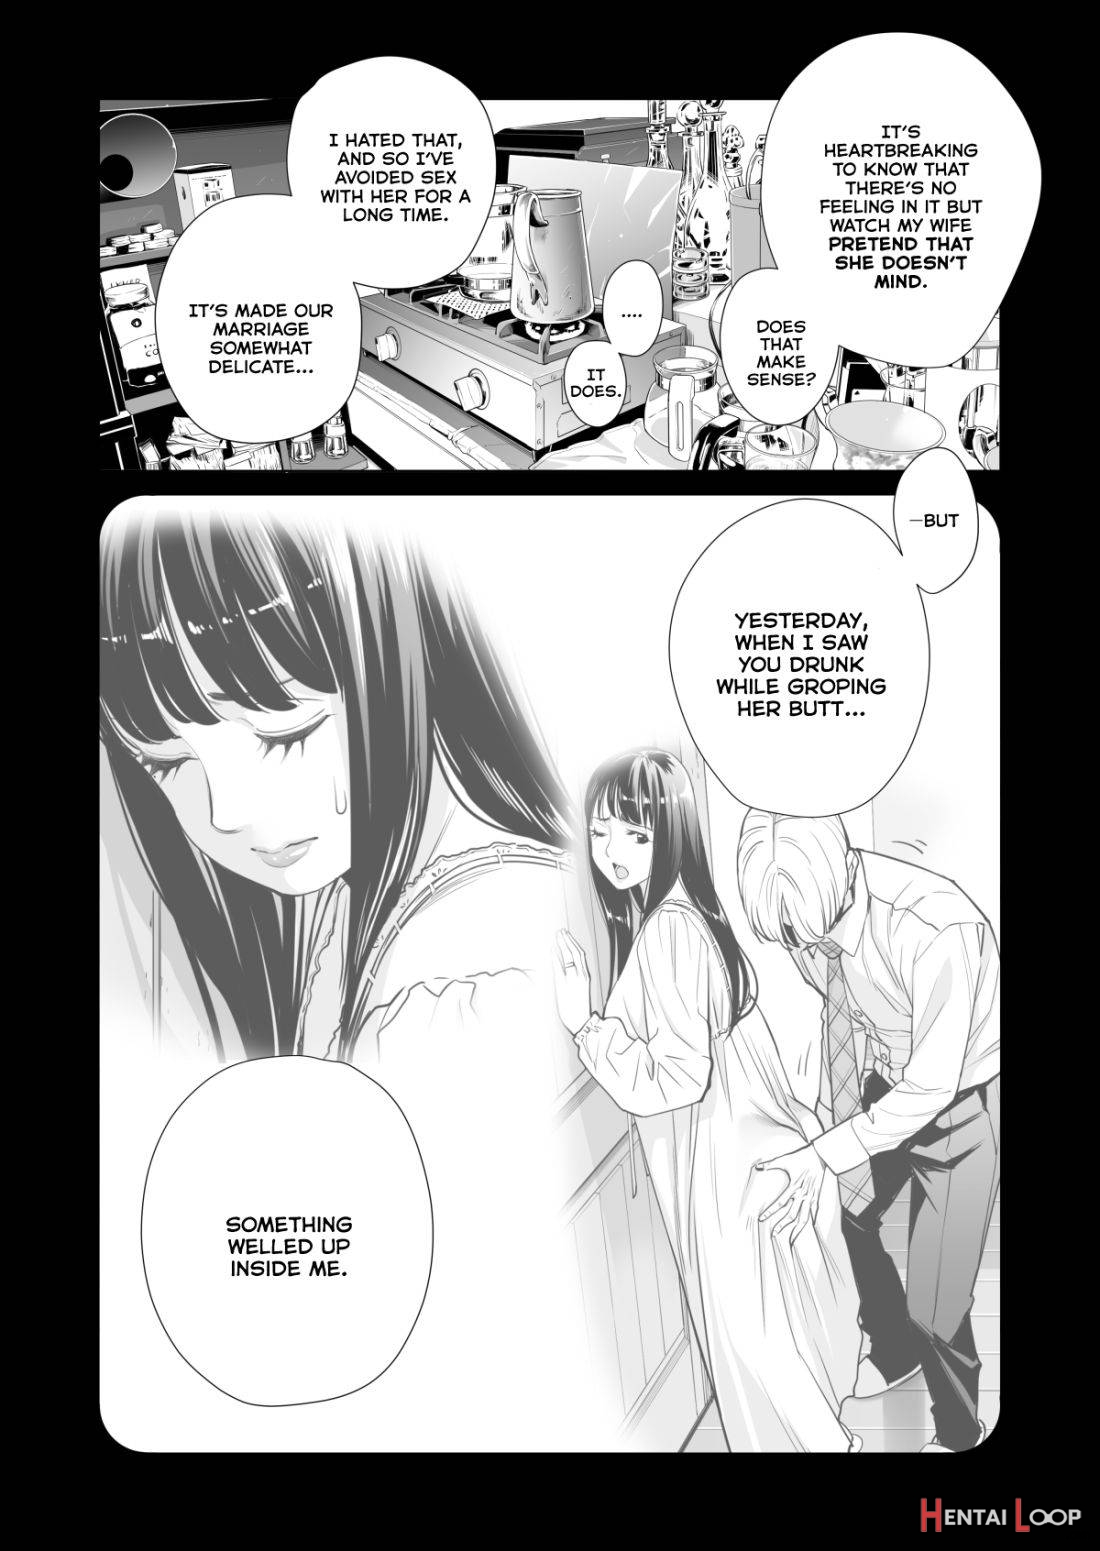 Tsukiyo no Midare Zake (Kouhen) Moonlit Intoxication ~ A Housewife Stolen by a Coworker Besides her Blackout Drunk Husband ~ Chapter 2 page 46